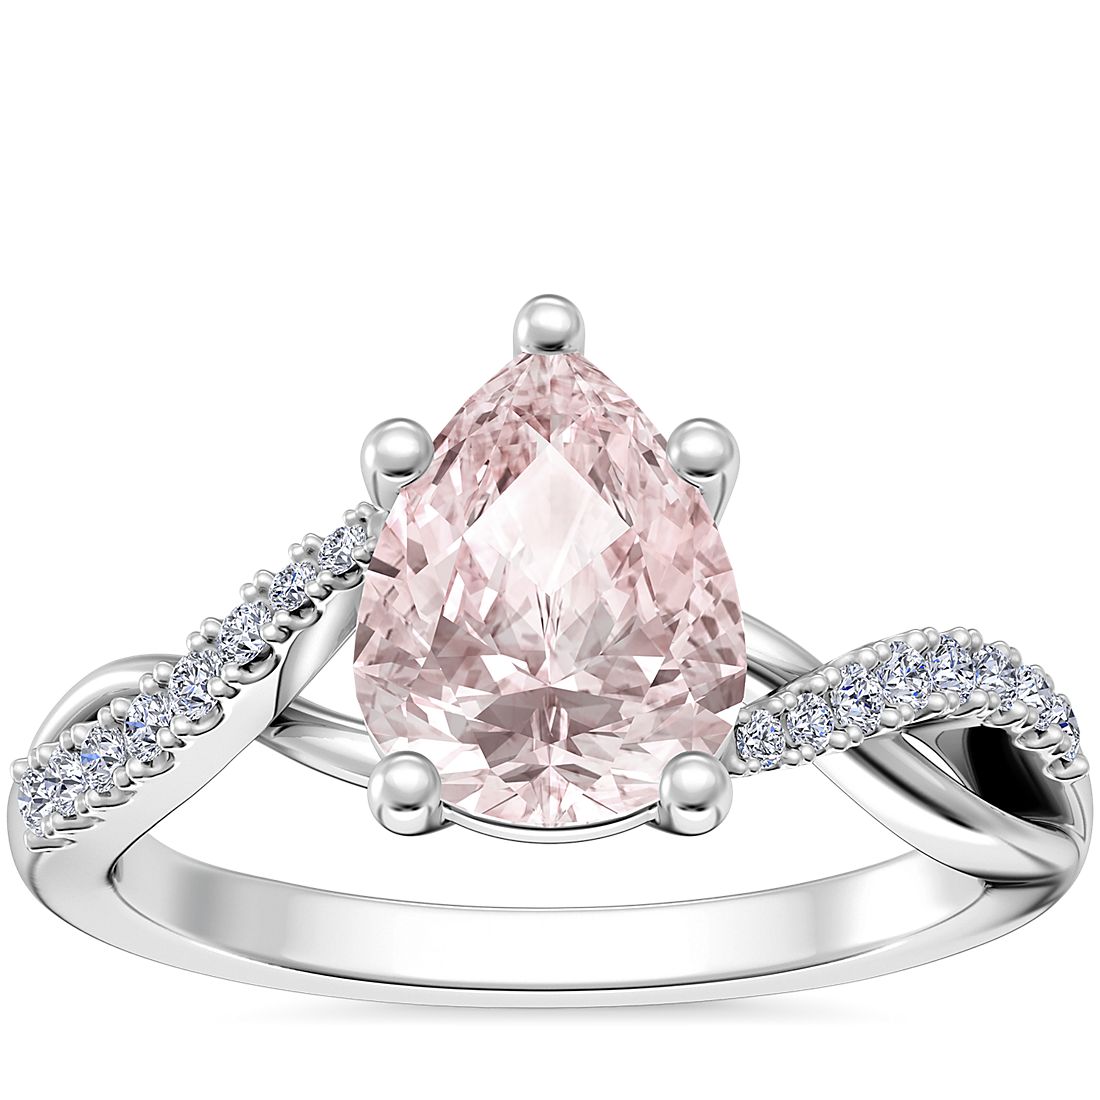 Classic Petite Twist Diamond Engagement Ring with Pear-Shaped Morganite in Platinum (8x6mm)